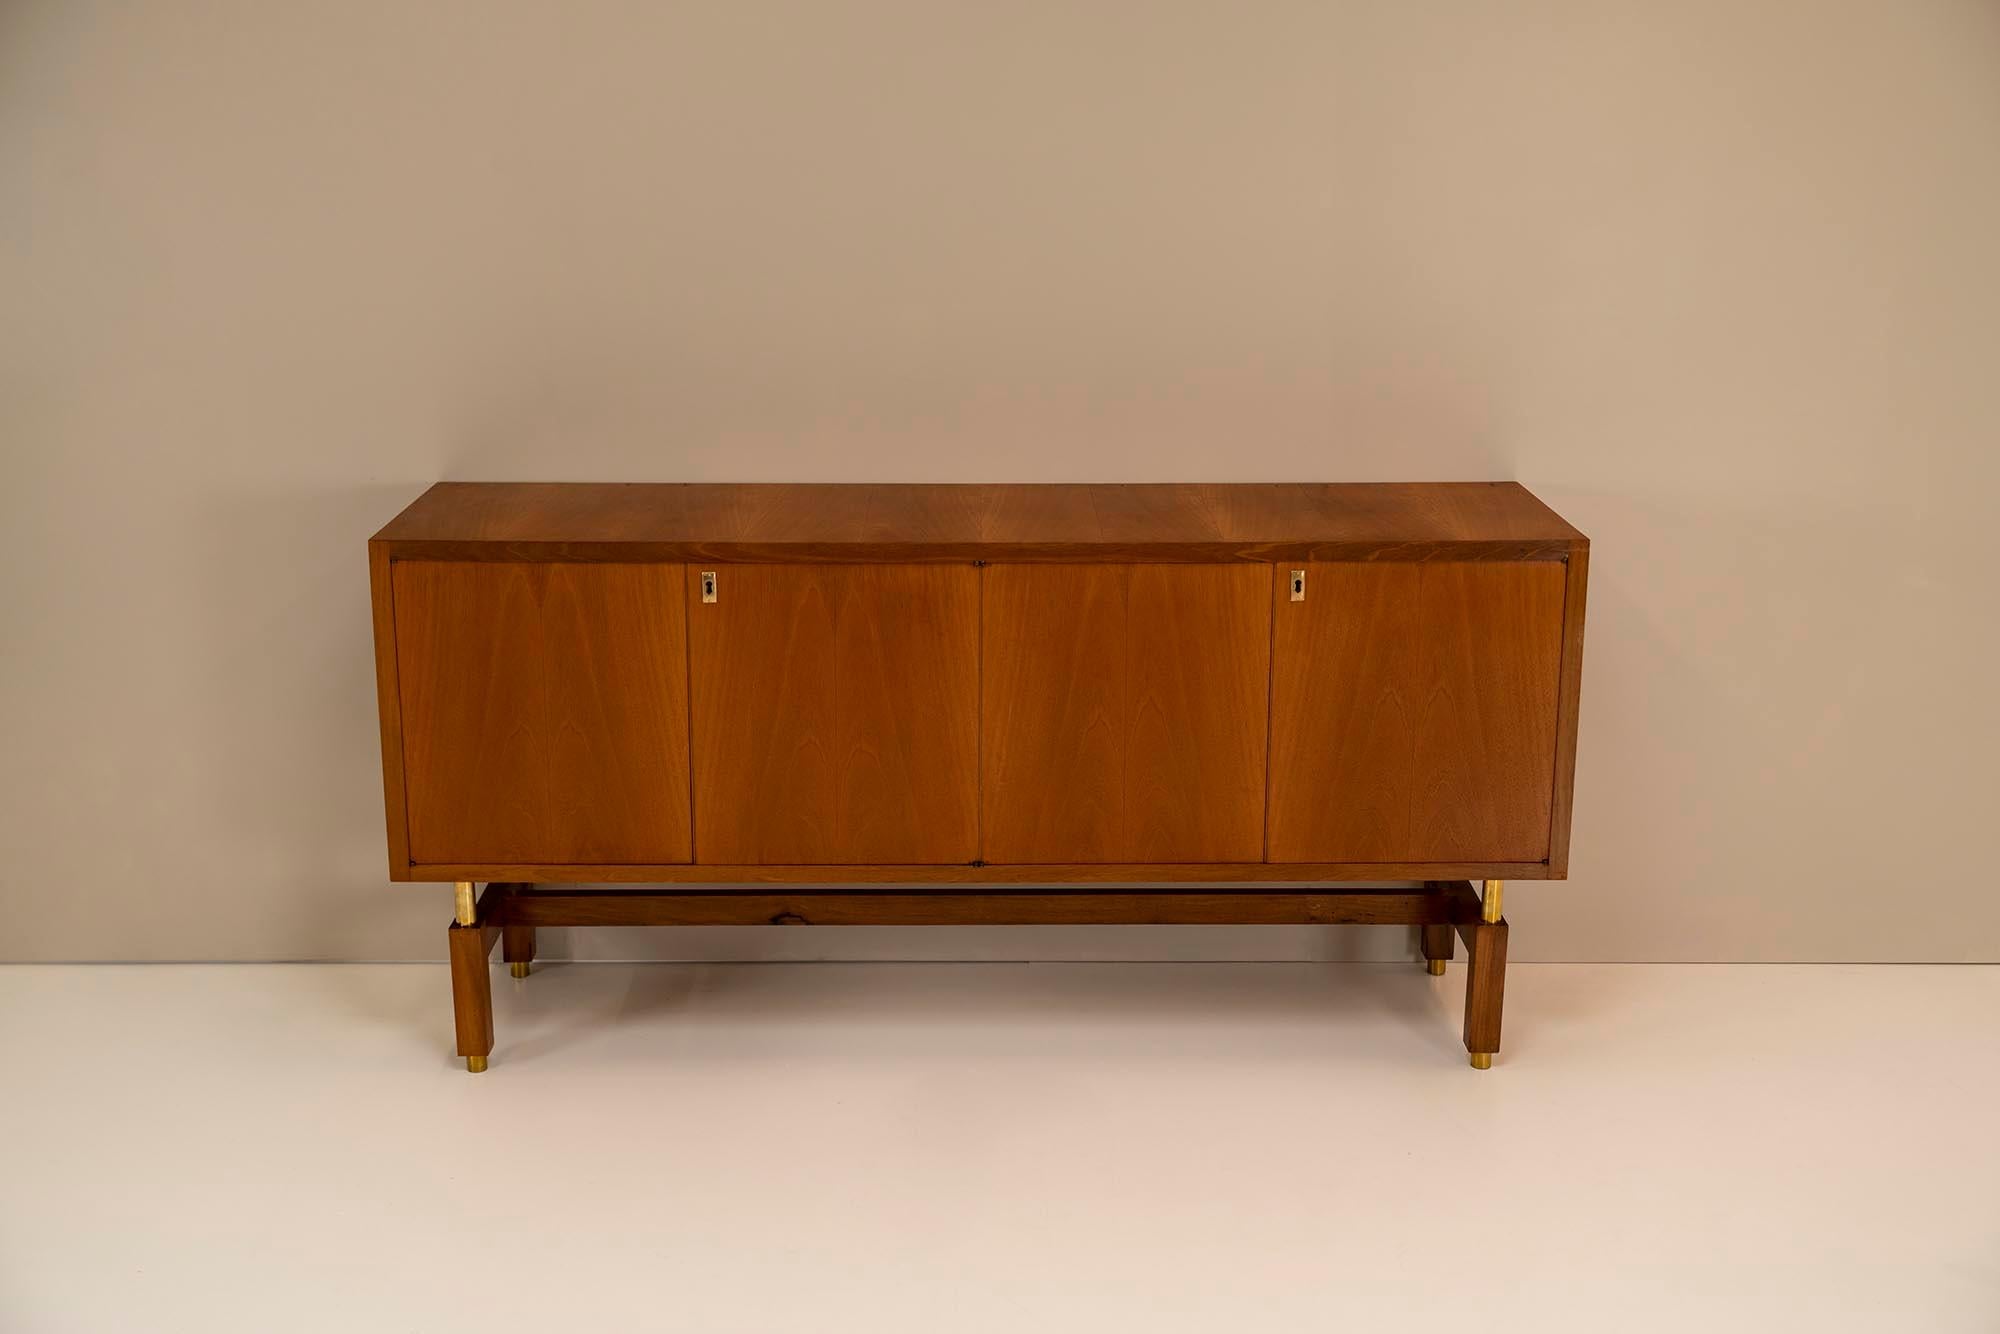 This Italian 1950s sideboard is manufactured with great precision and has a very refined appearance. A beautiful selection of veneers has been made for the doors and the top, whereby the flames in the wood are beautifully mirrored. The frame of the